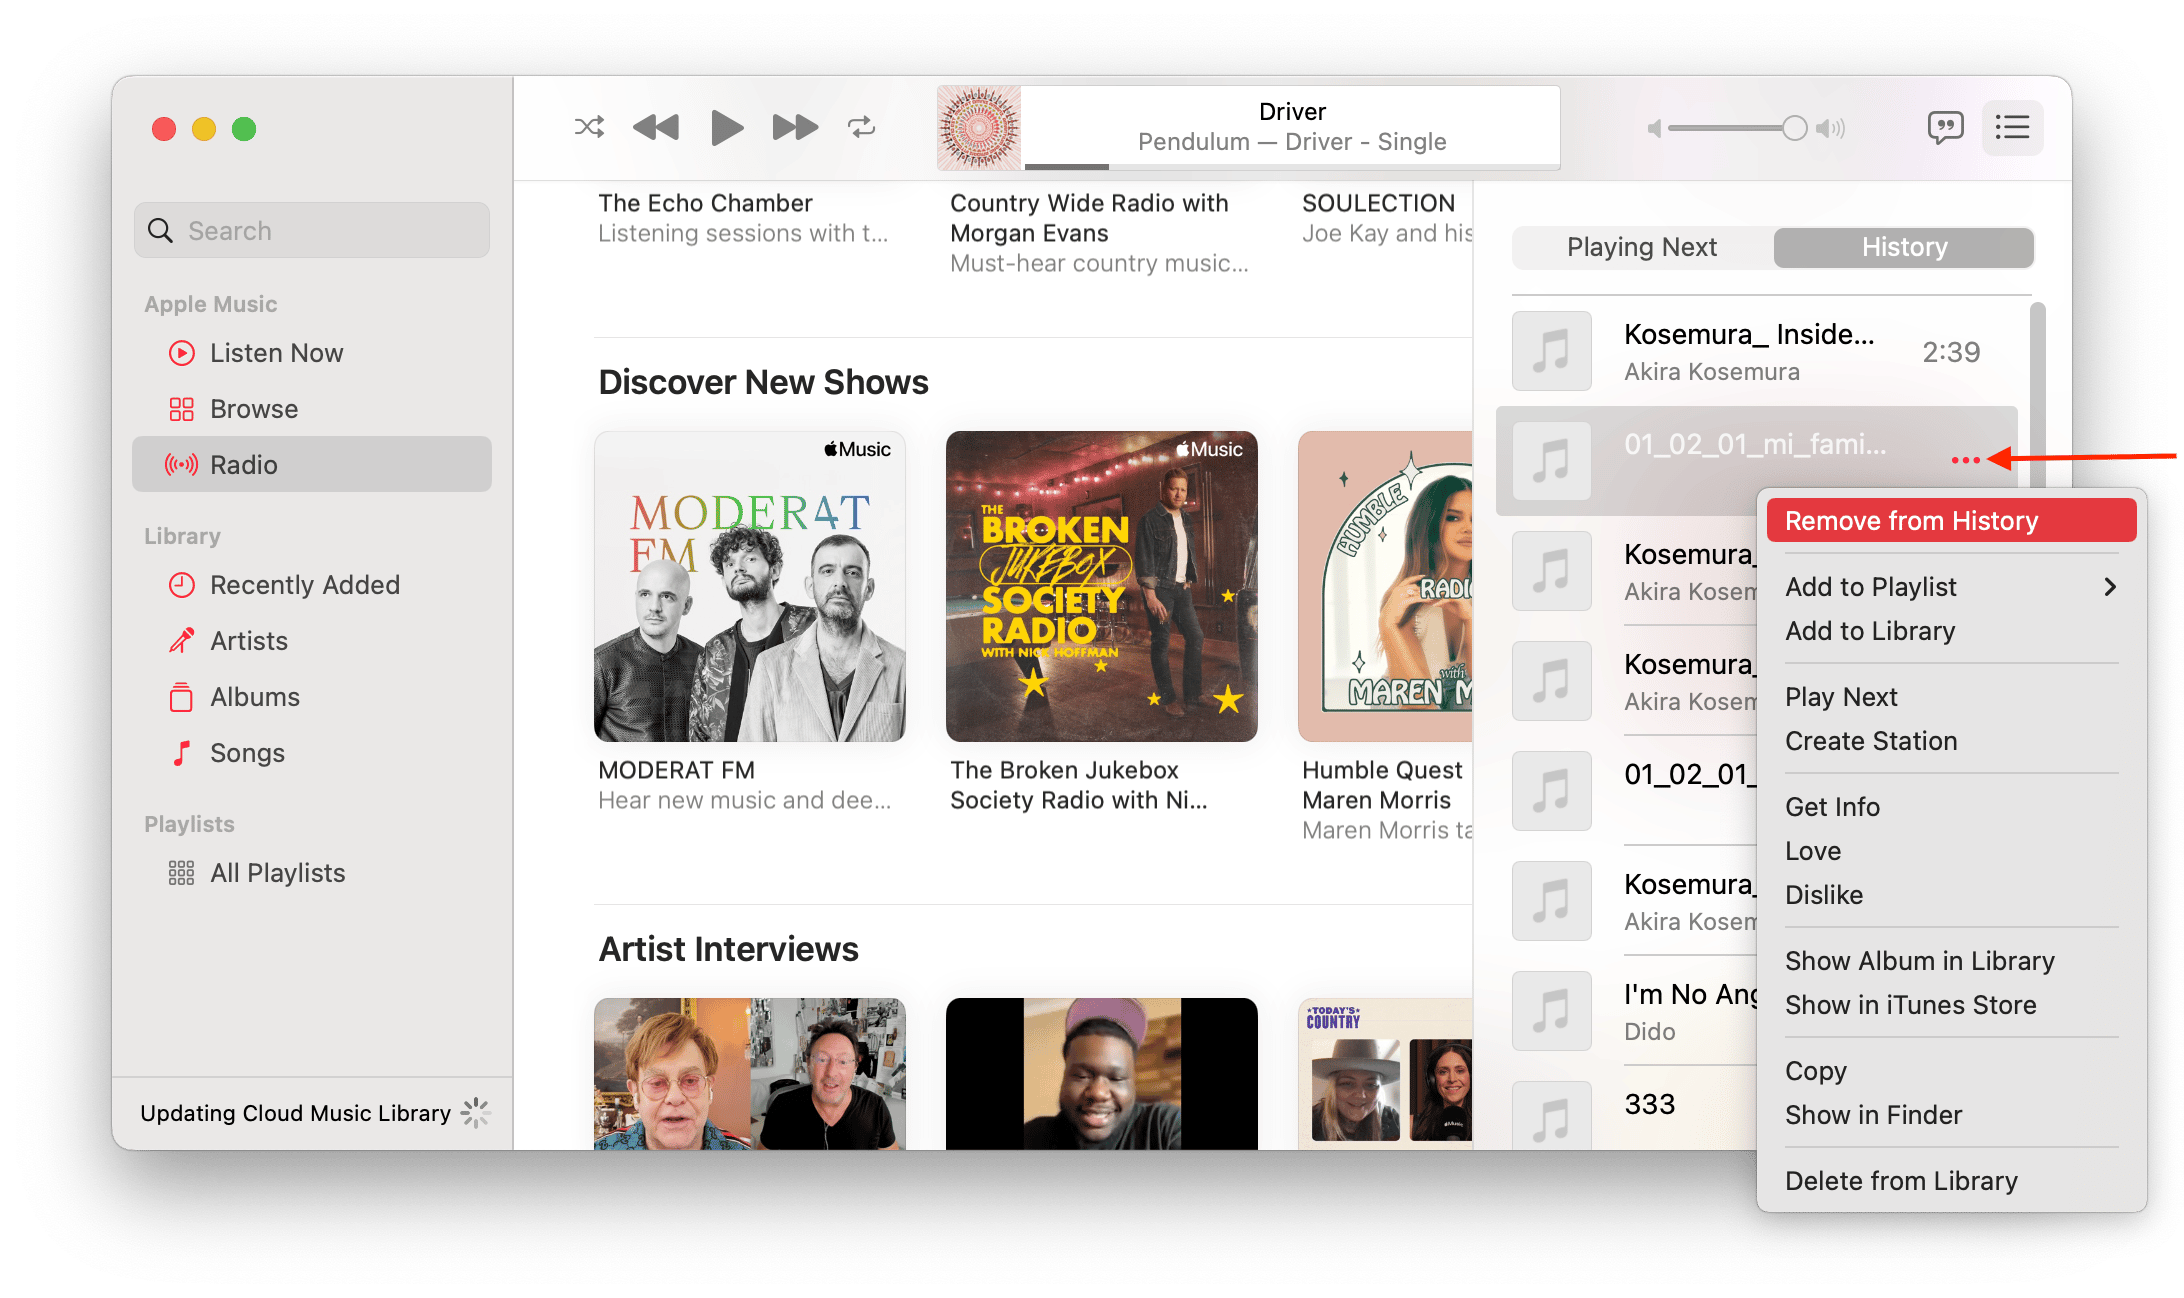 removing items from Apple Music history